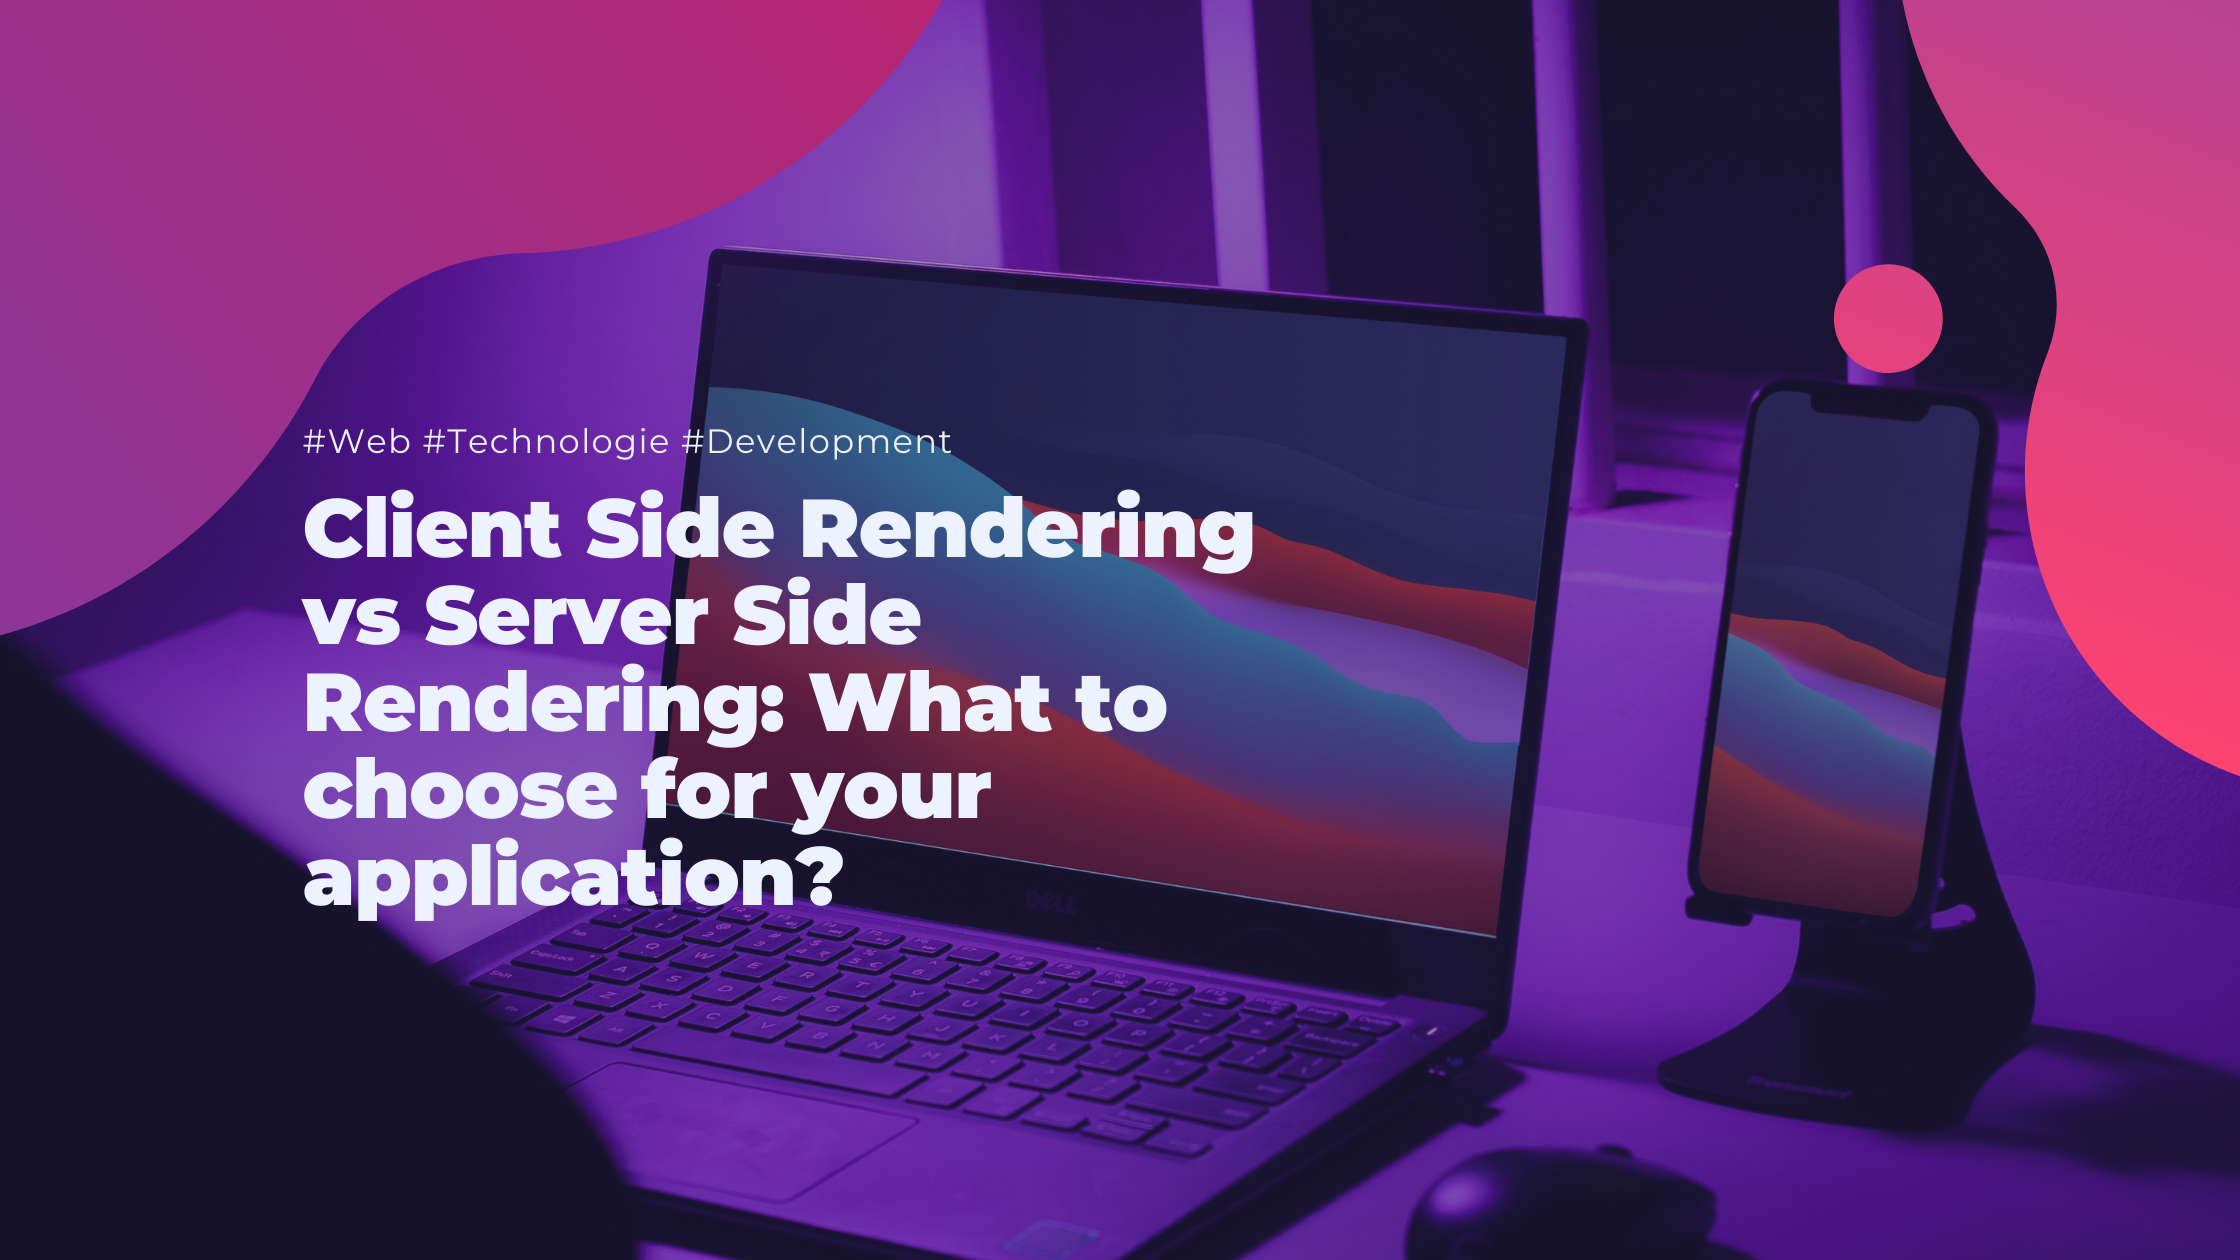 Client Side Rendering vs Server Side Rendering: What to choose for your application?